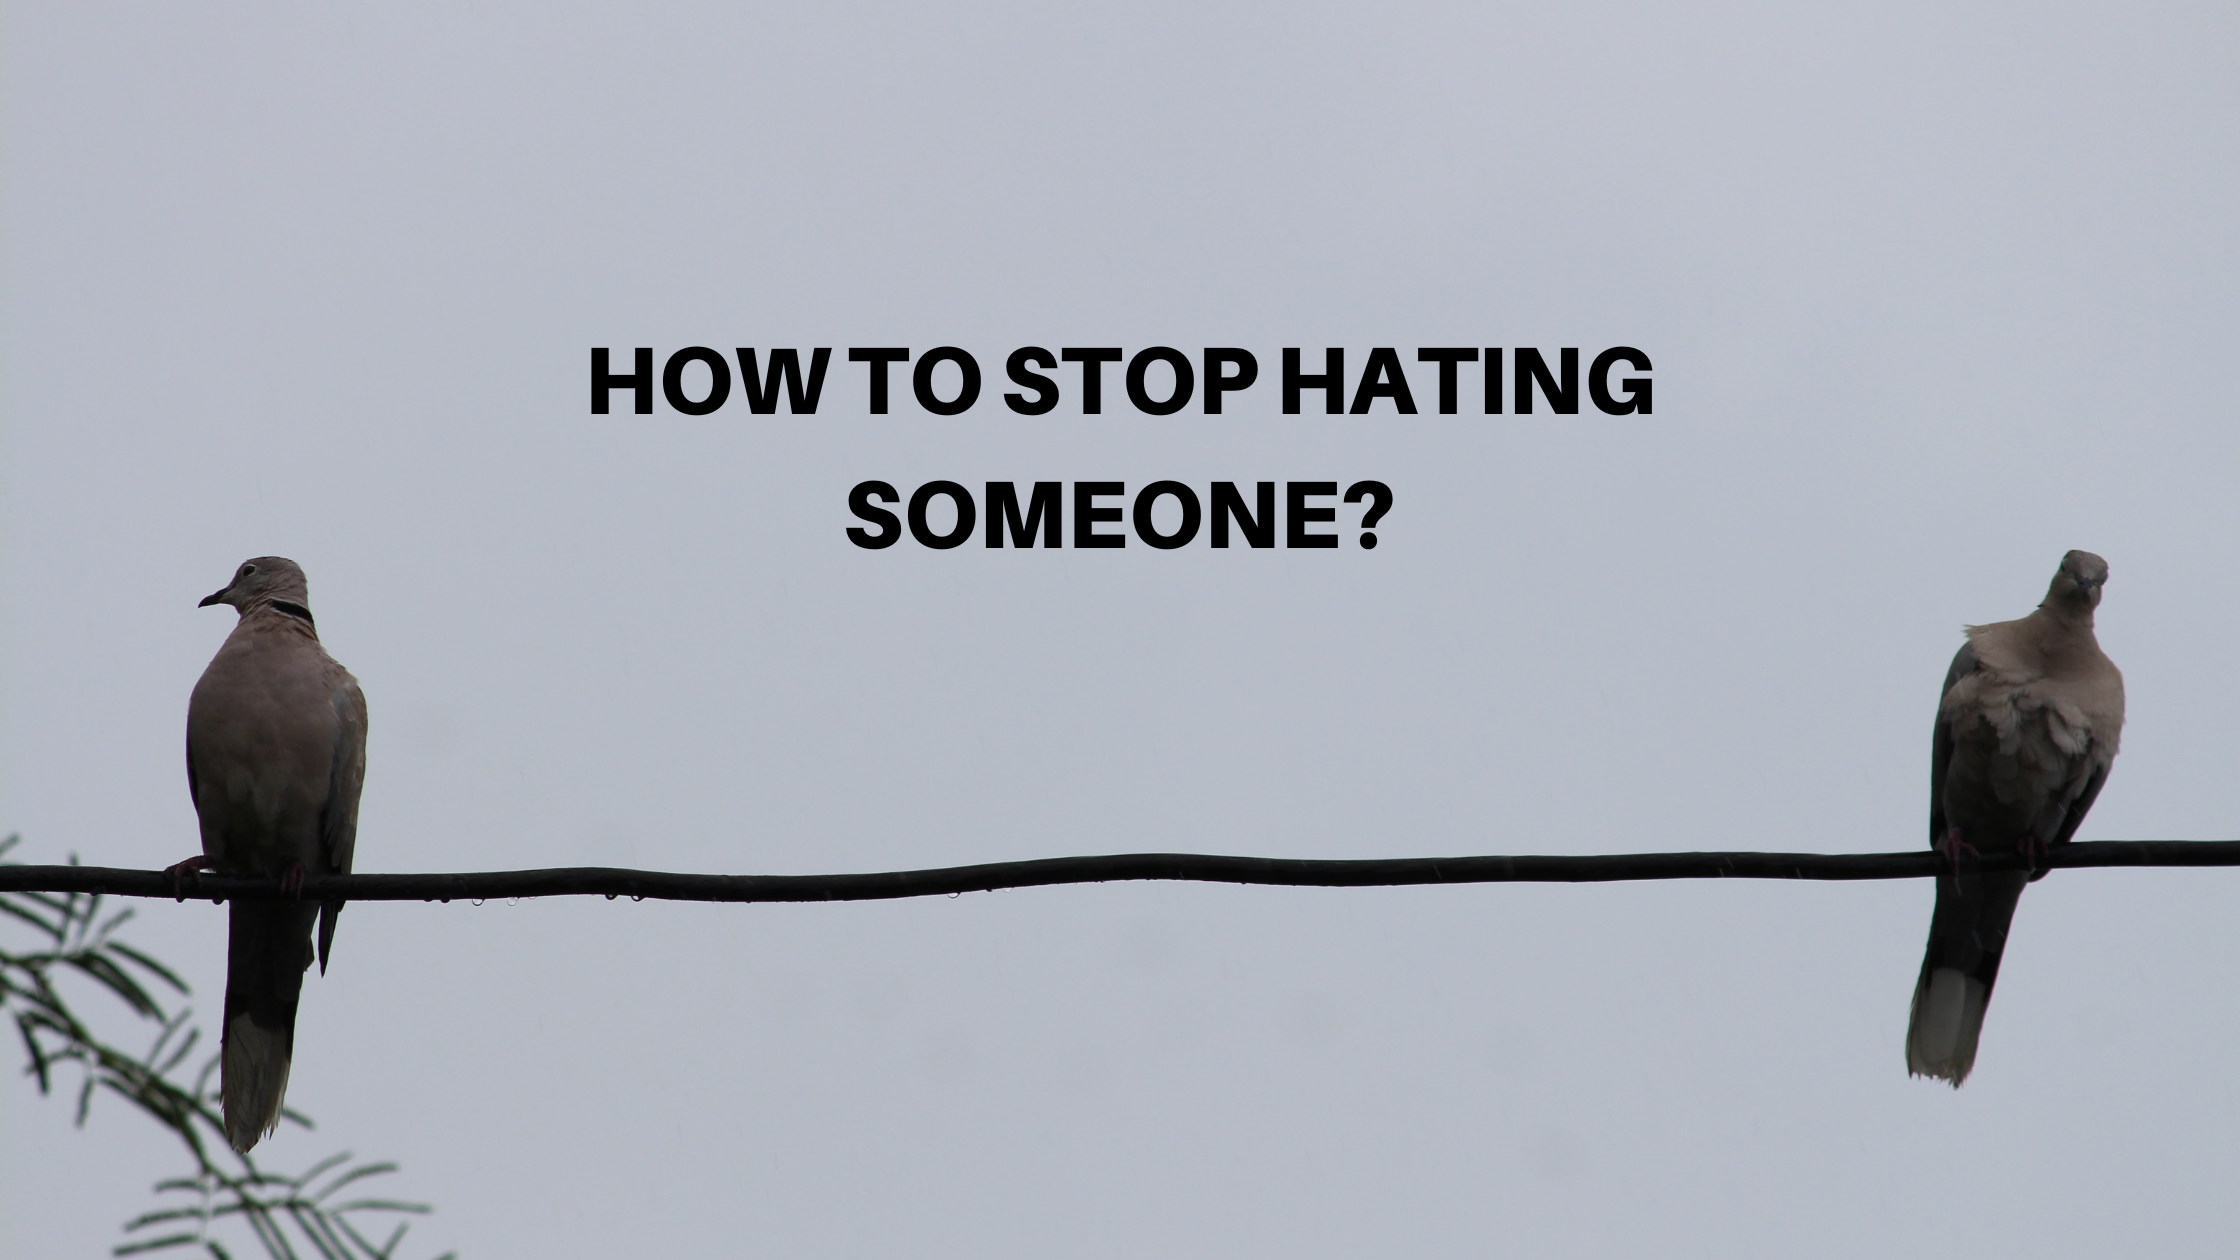 How to Stop Hating Someone